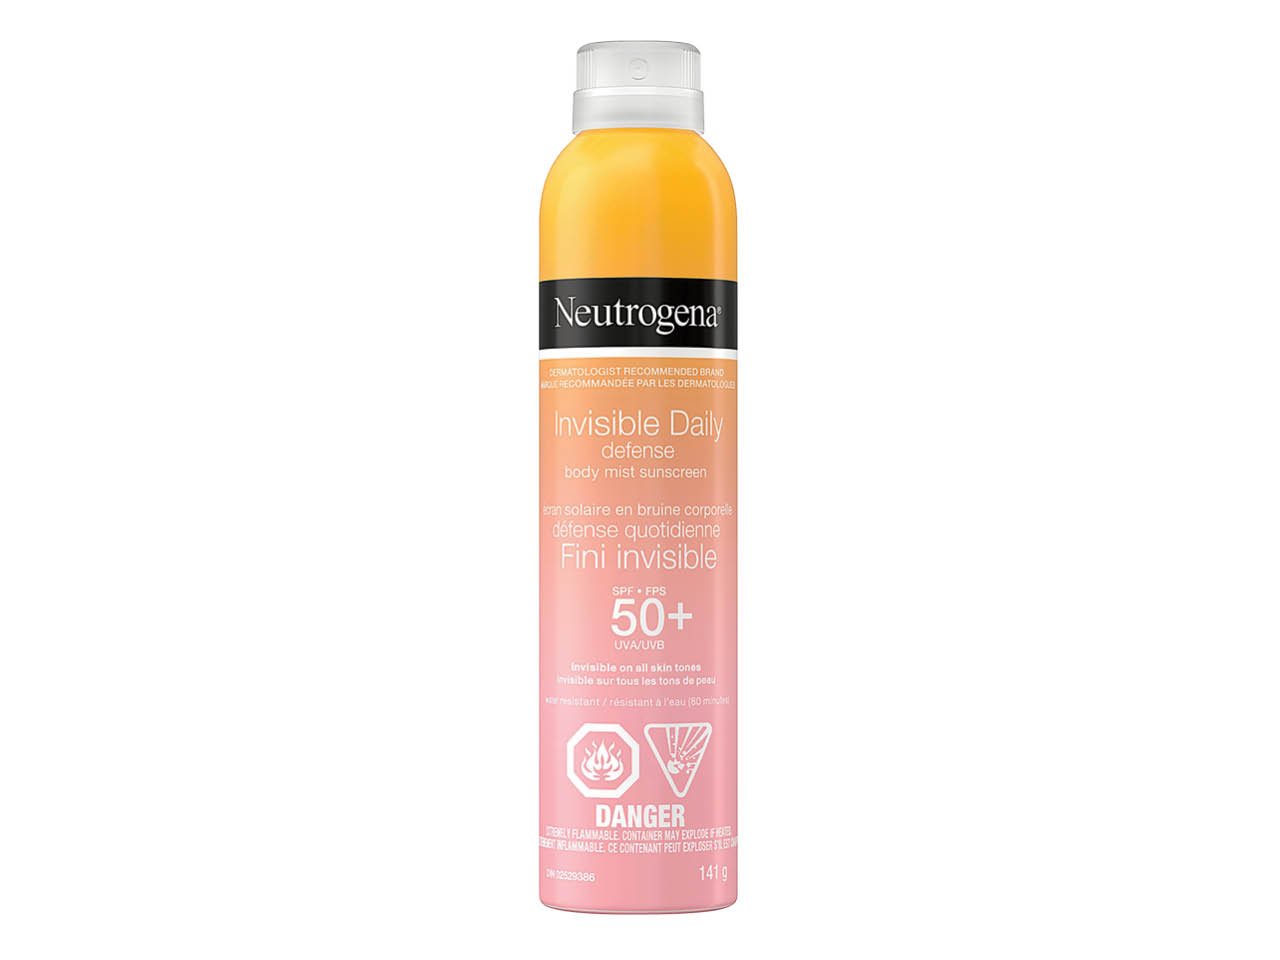 An orange and pink ombré spray can of Neutrogena Invisible Daily Defense Body Mist SPF 50+ sunscreen.